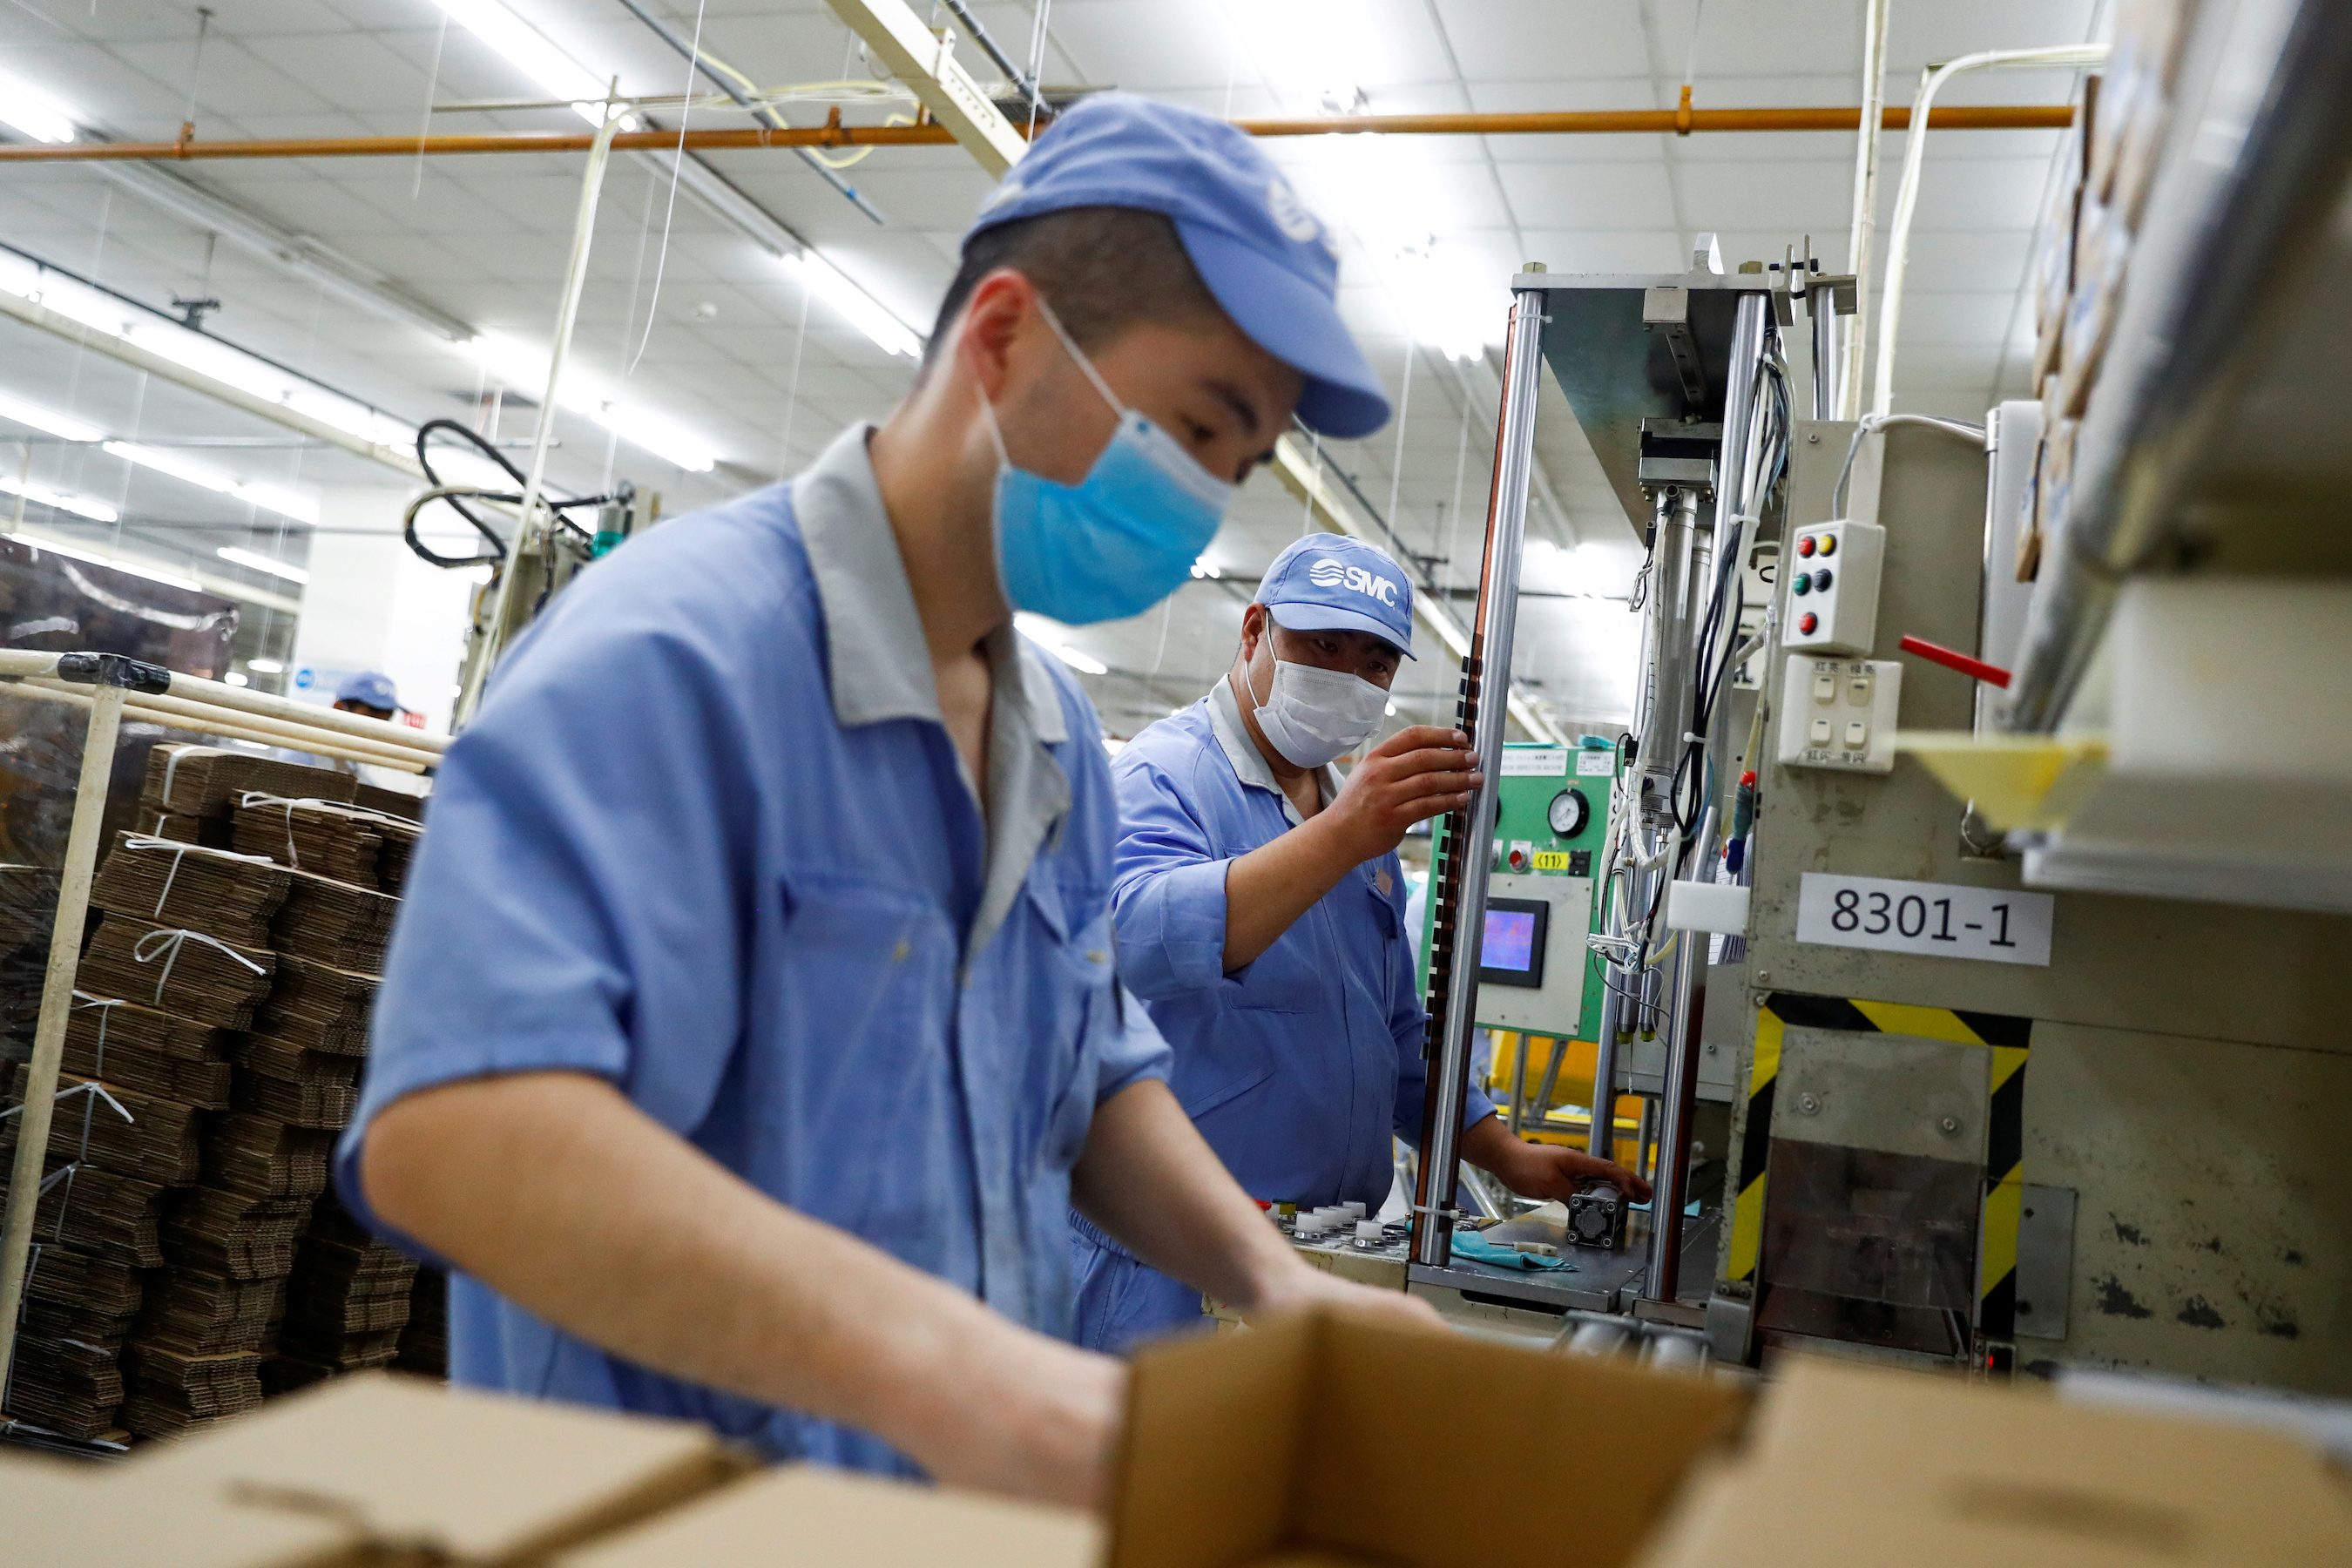 Factories have mixed performance as pandemic impact lingers